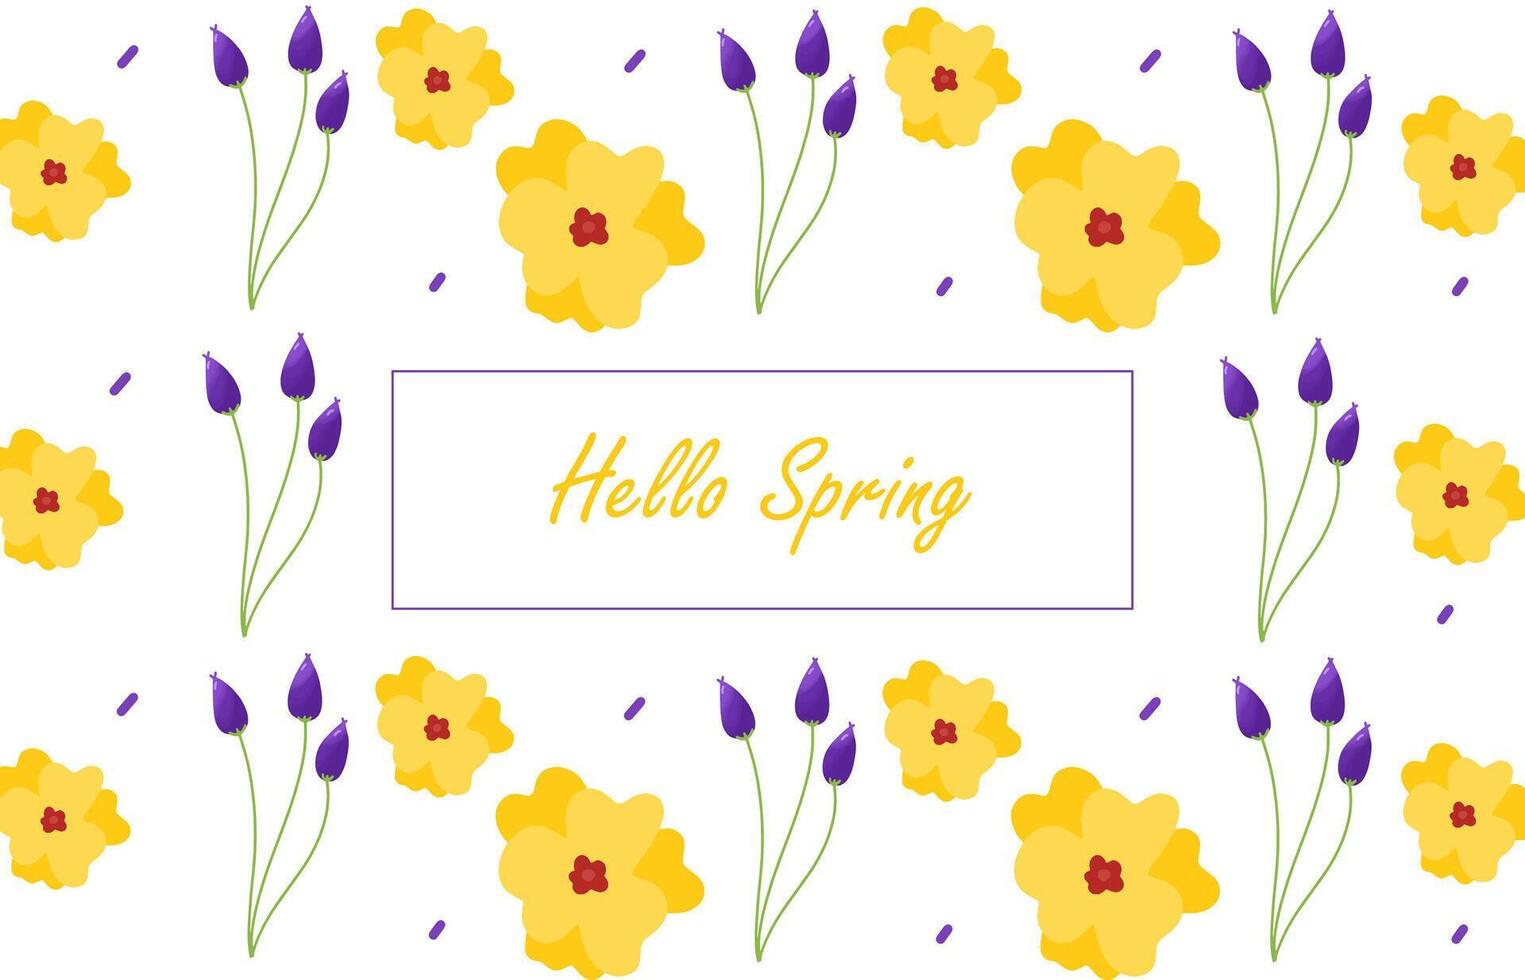 Hello spring floral pattern. Yellow and purple spring flowers illustration. Fit for Fabric, Textile, Packaging design, Wrapping Paper, Wallpaper, Background vector